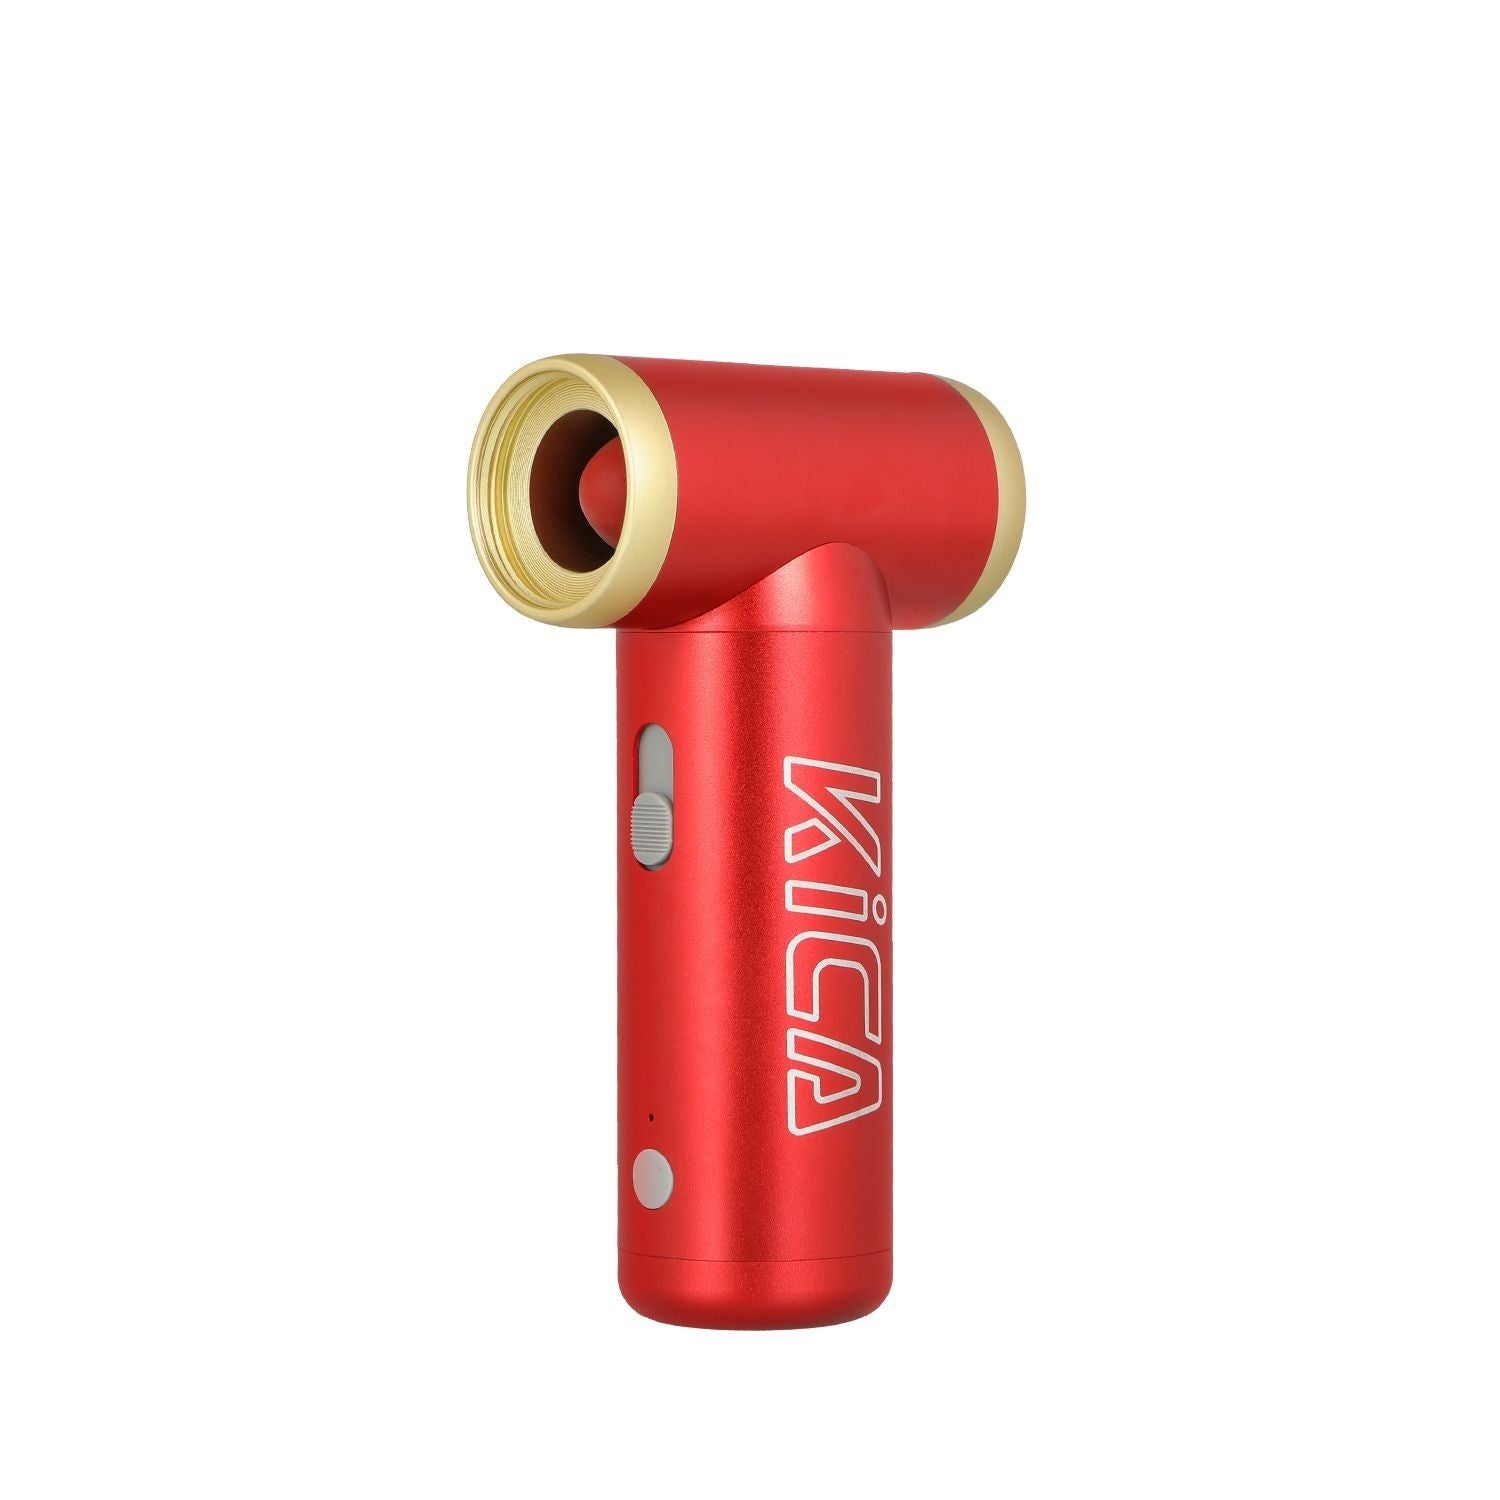 Kica - Jetfan 2 - Portable, More Powerful, and Multi-functional Air Duster Red